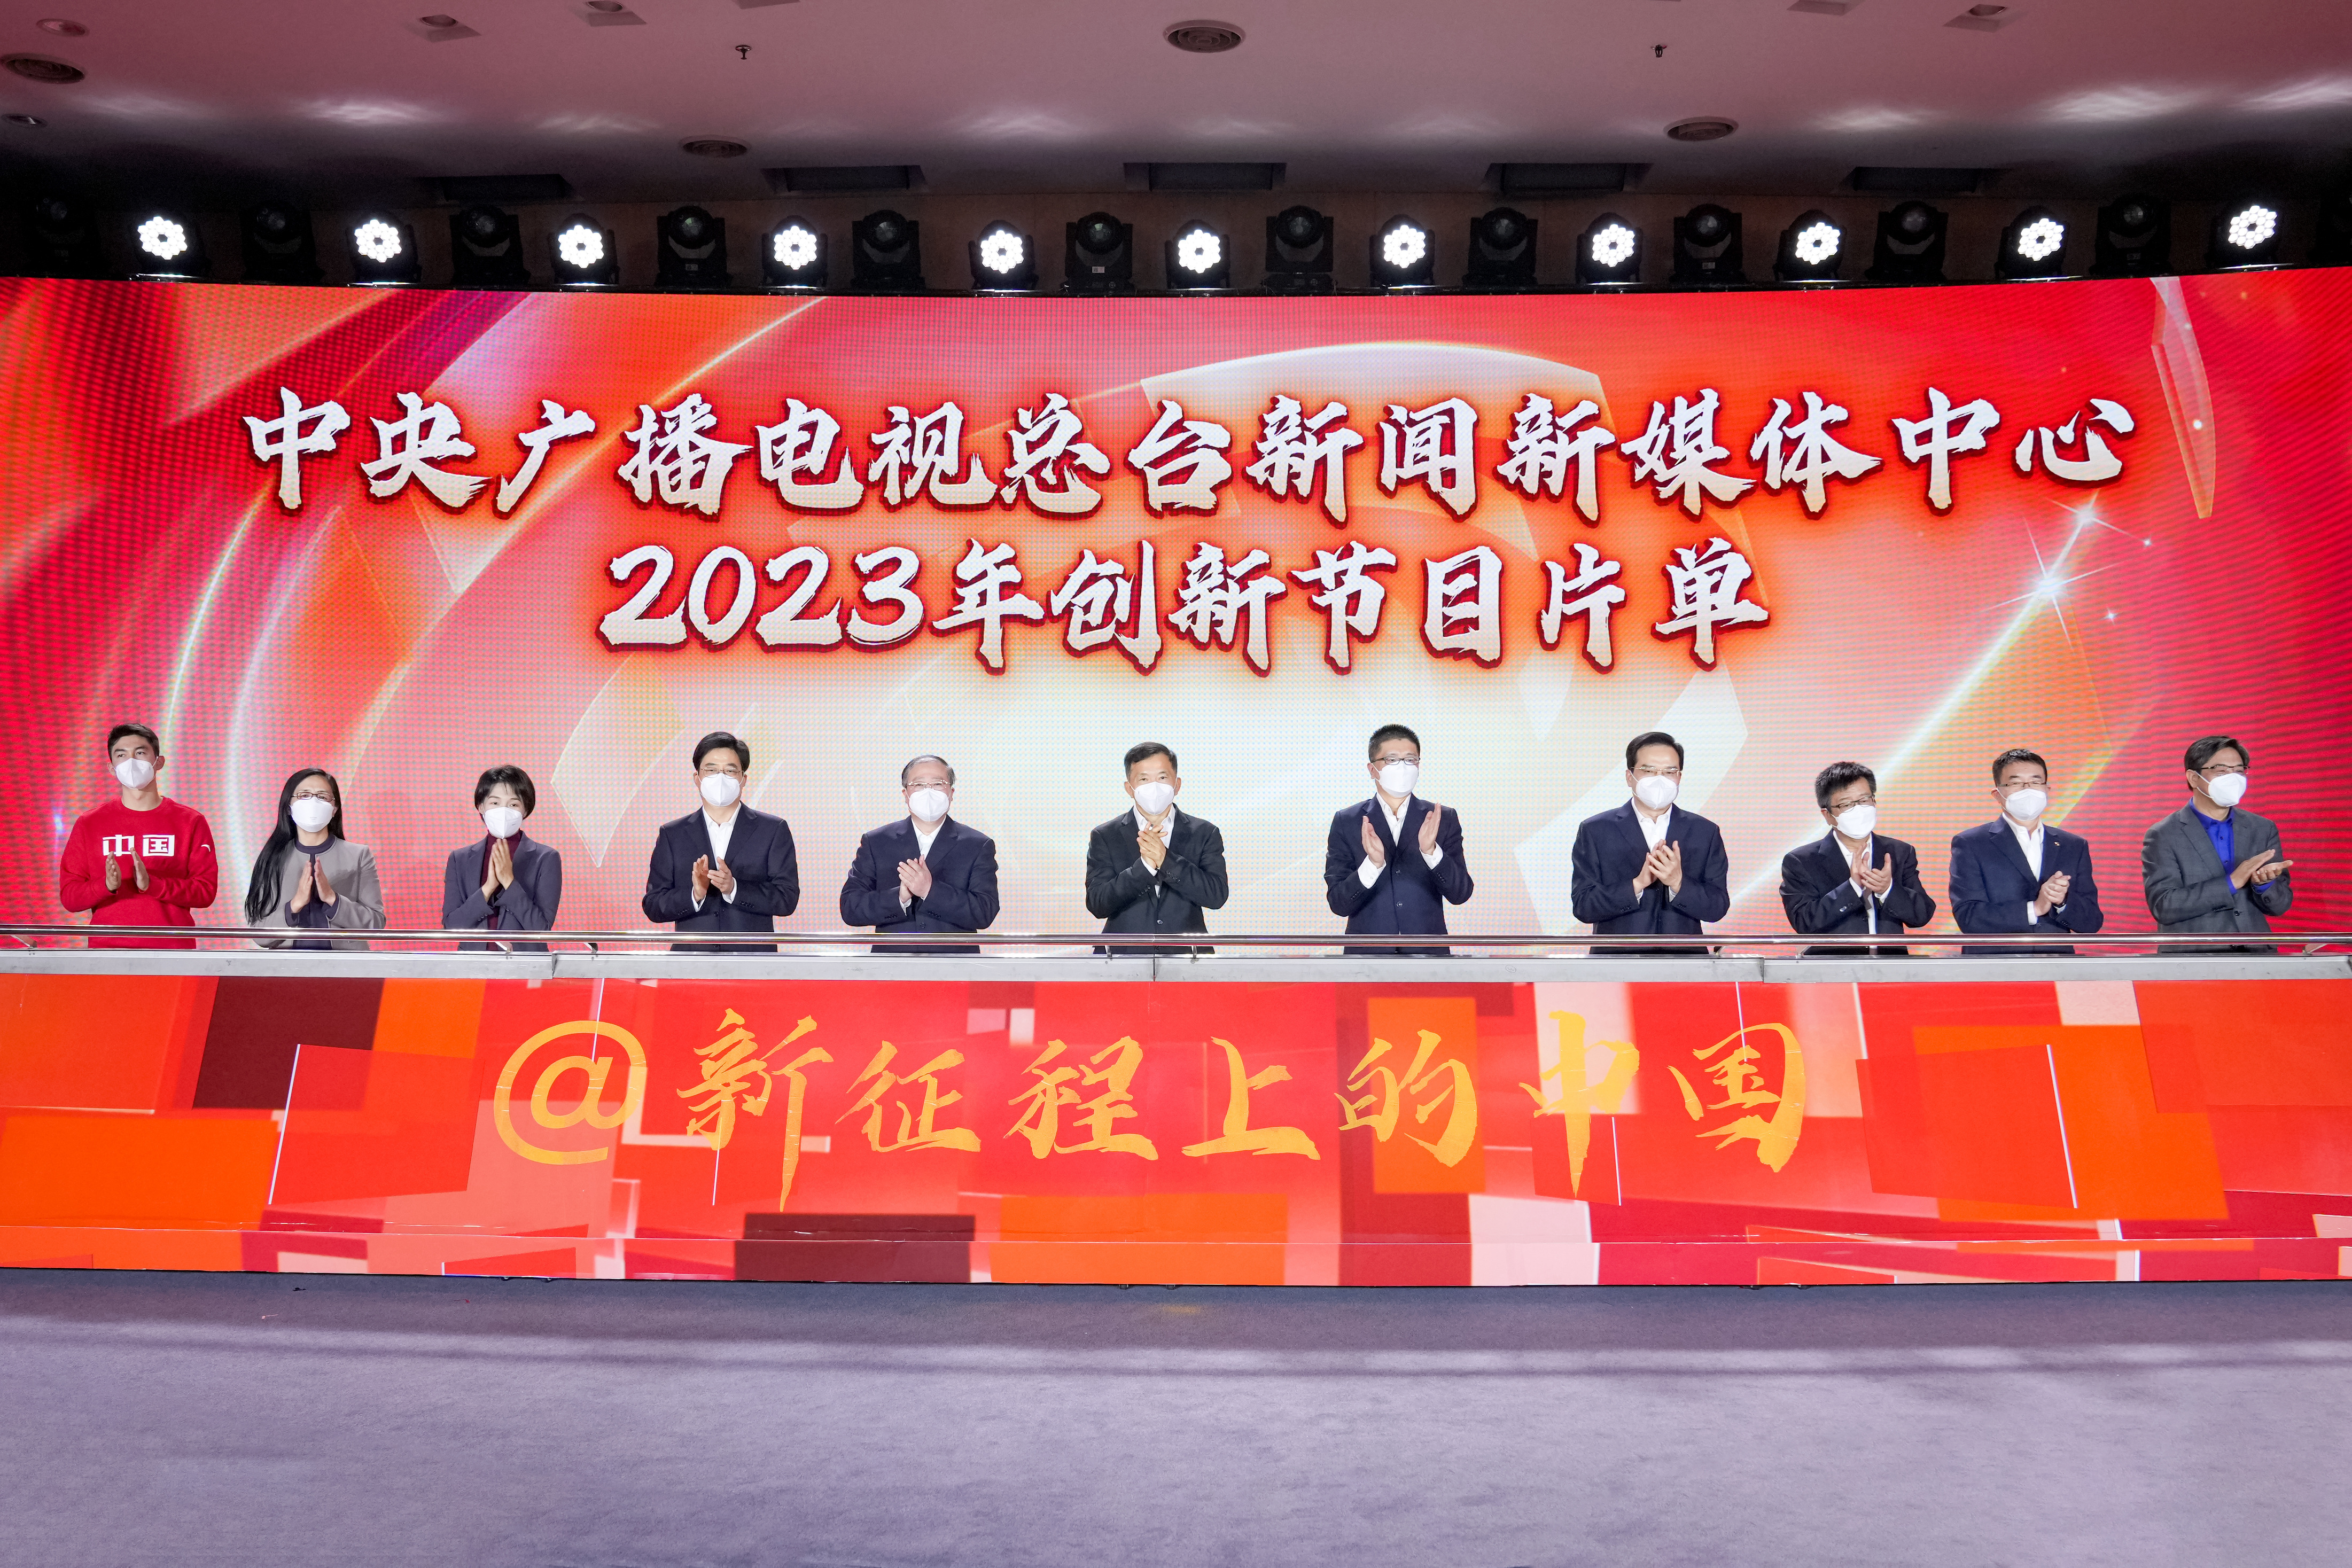 China Media Group holds a release ceremony of 2023 innovative program list for new media platforms in Beijing, January 18, 2023. /CMG